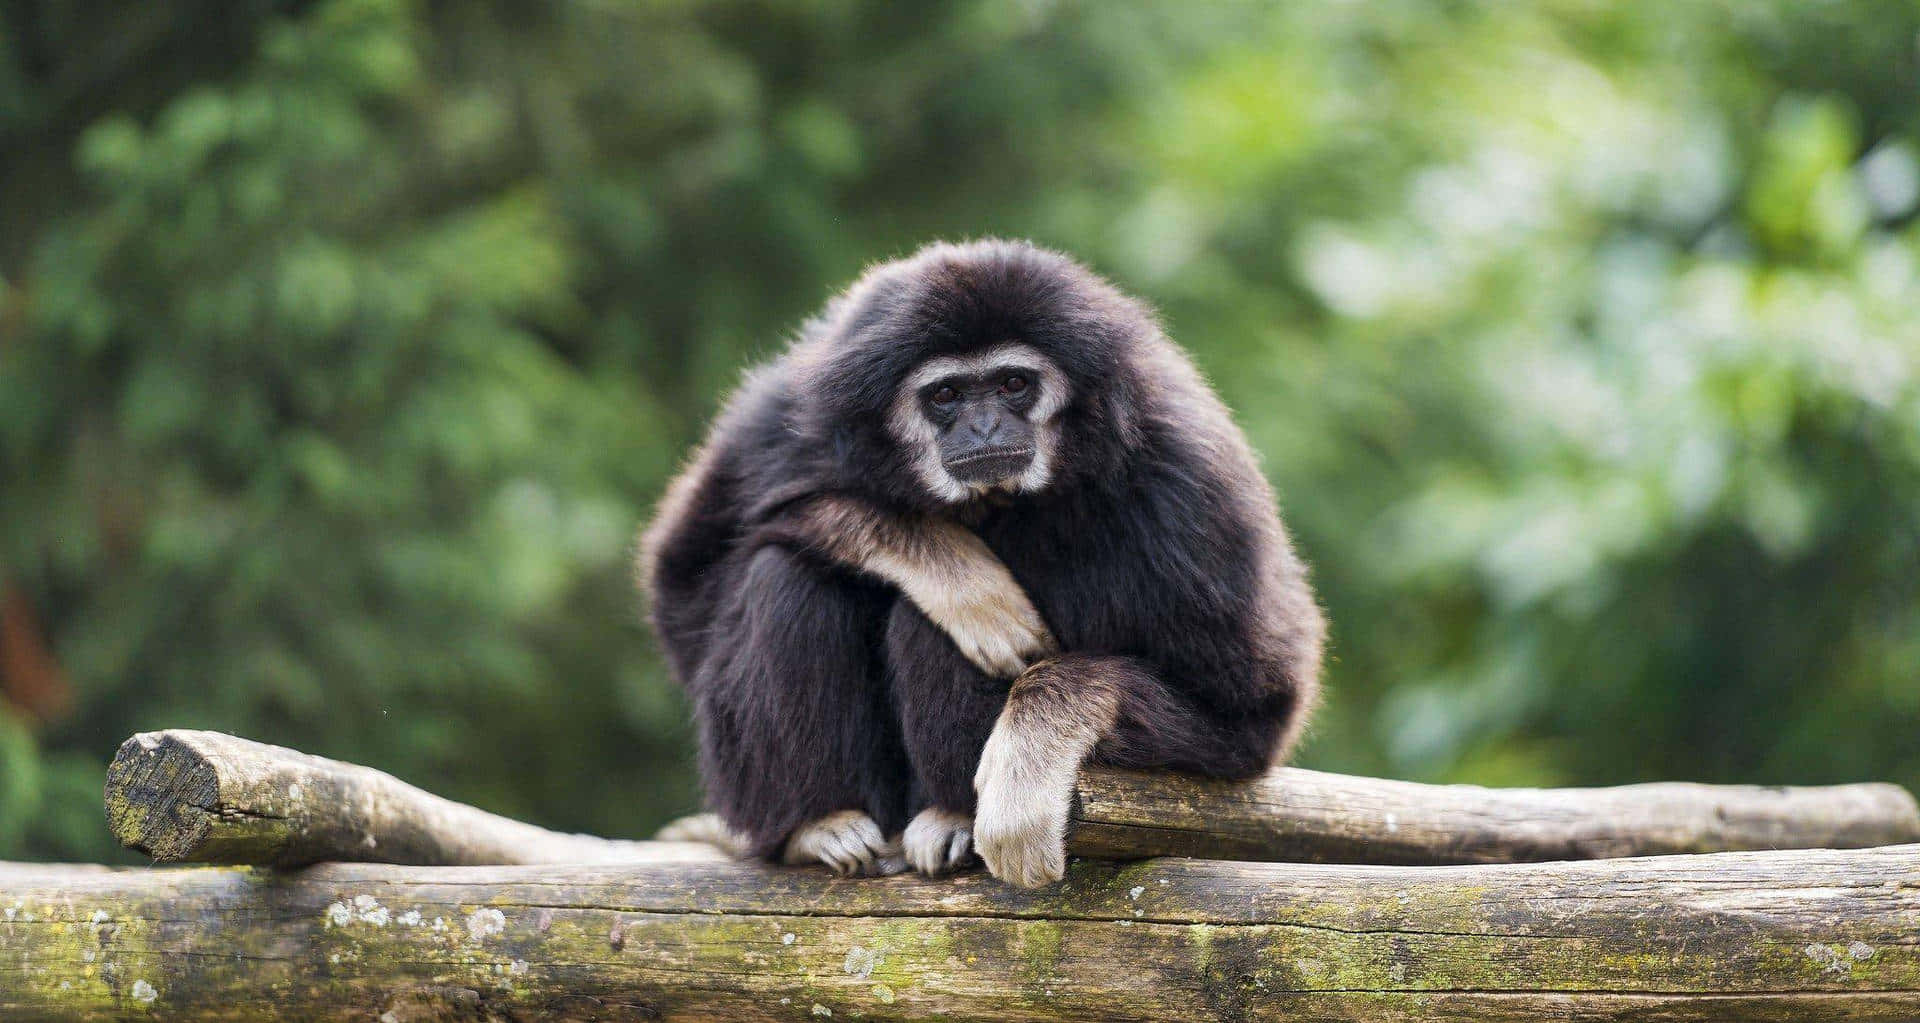 Explore the Wild with a Hd Gibbon